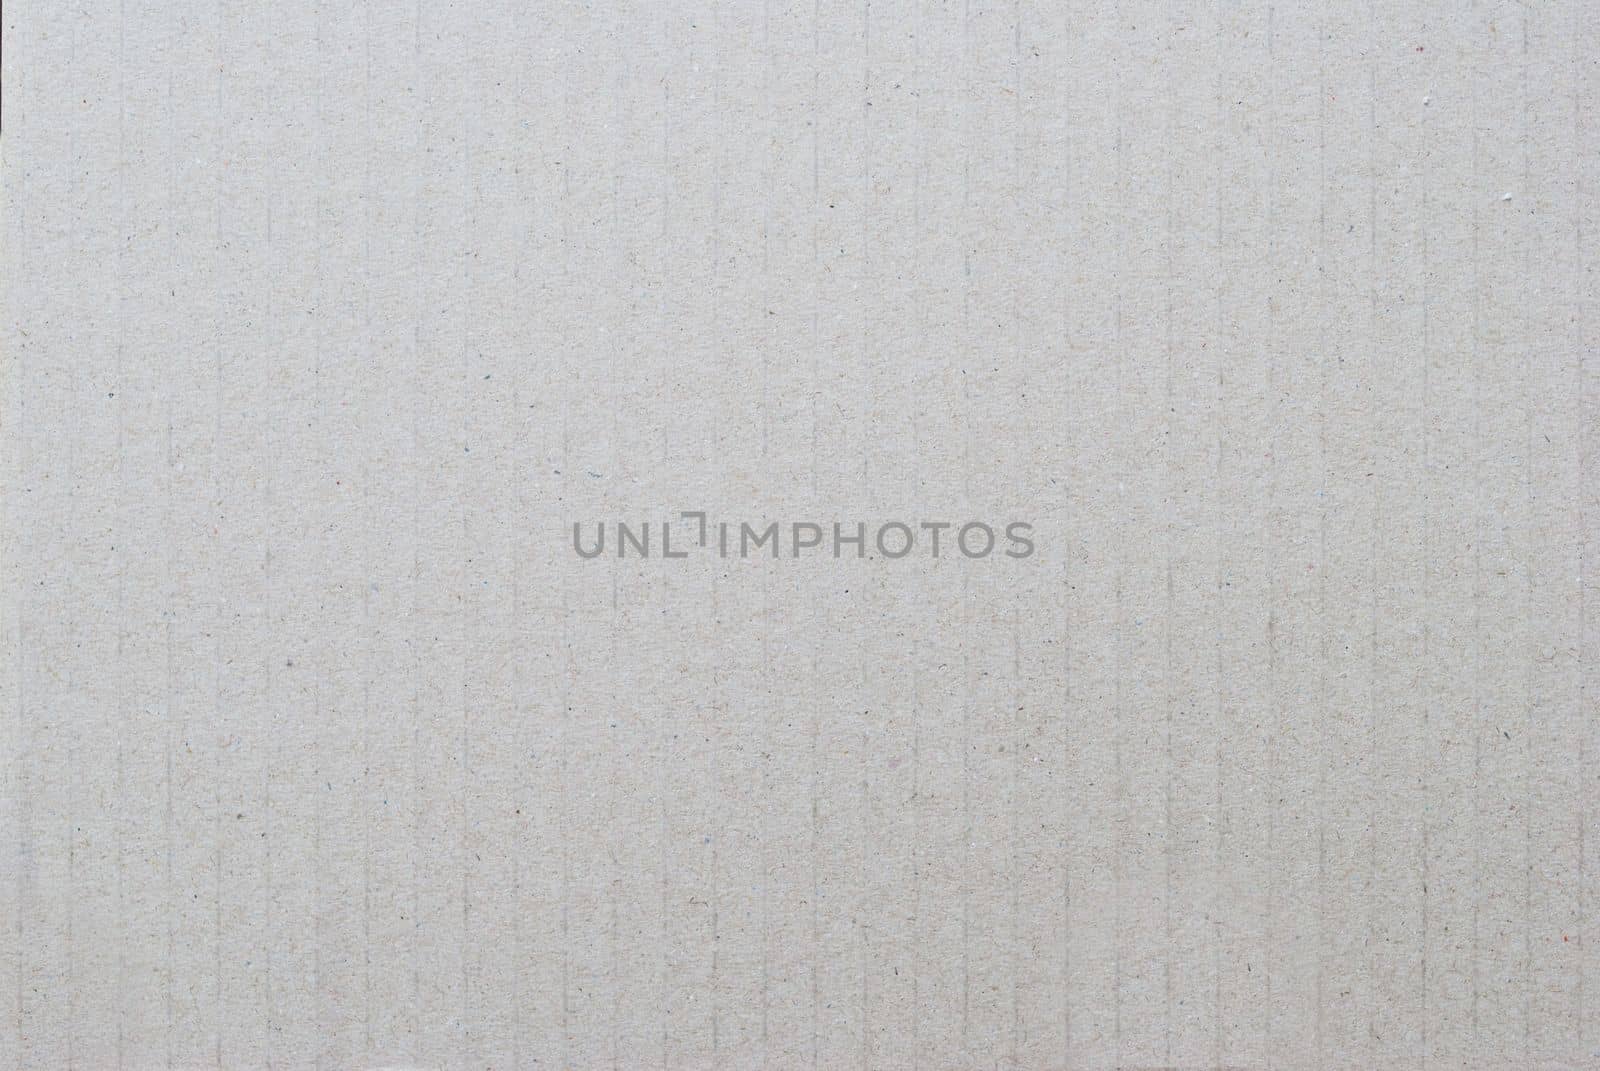 Gray Textured Of Paper, Crate paper